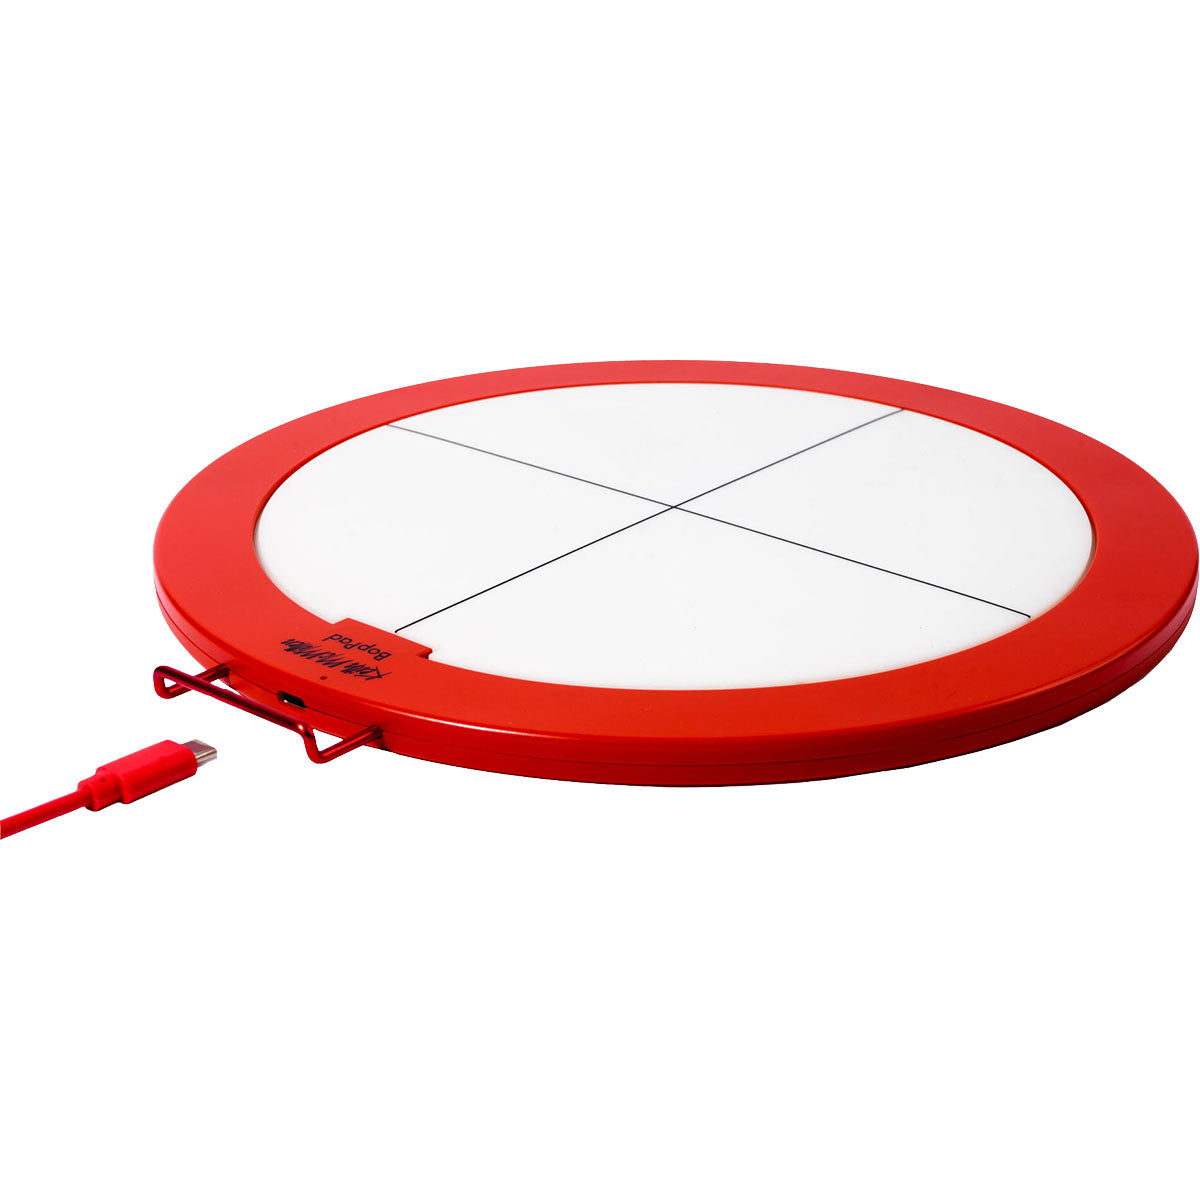 Keith McMillen Instruments BopPad Red USB-C Smart Fabric Drum Pad View 2